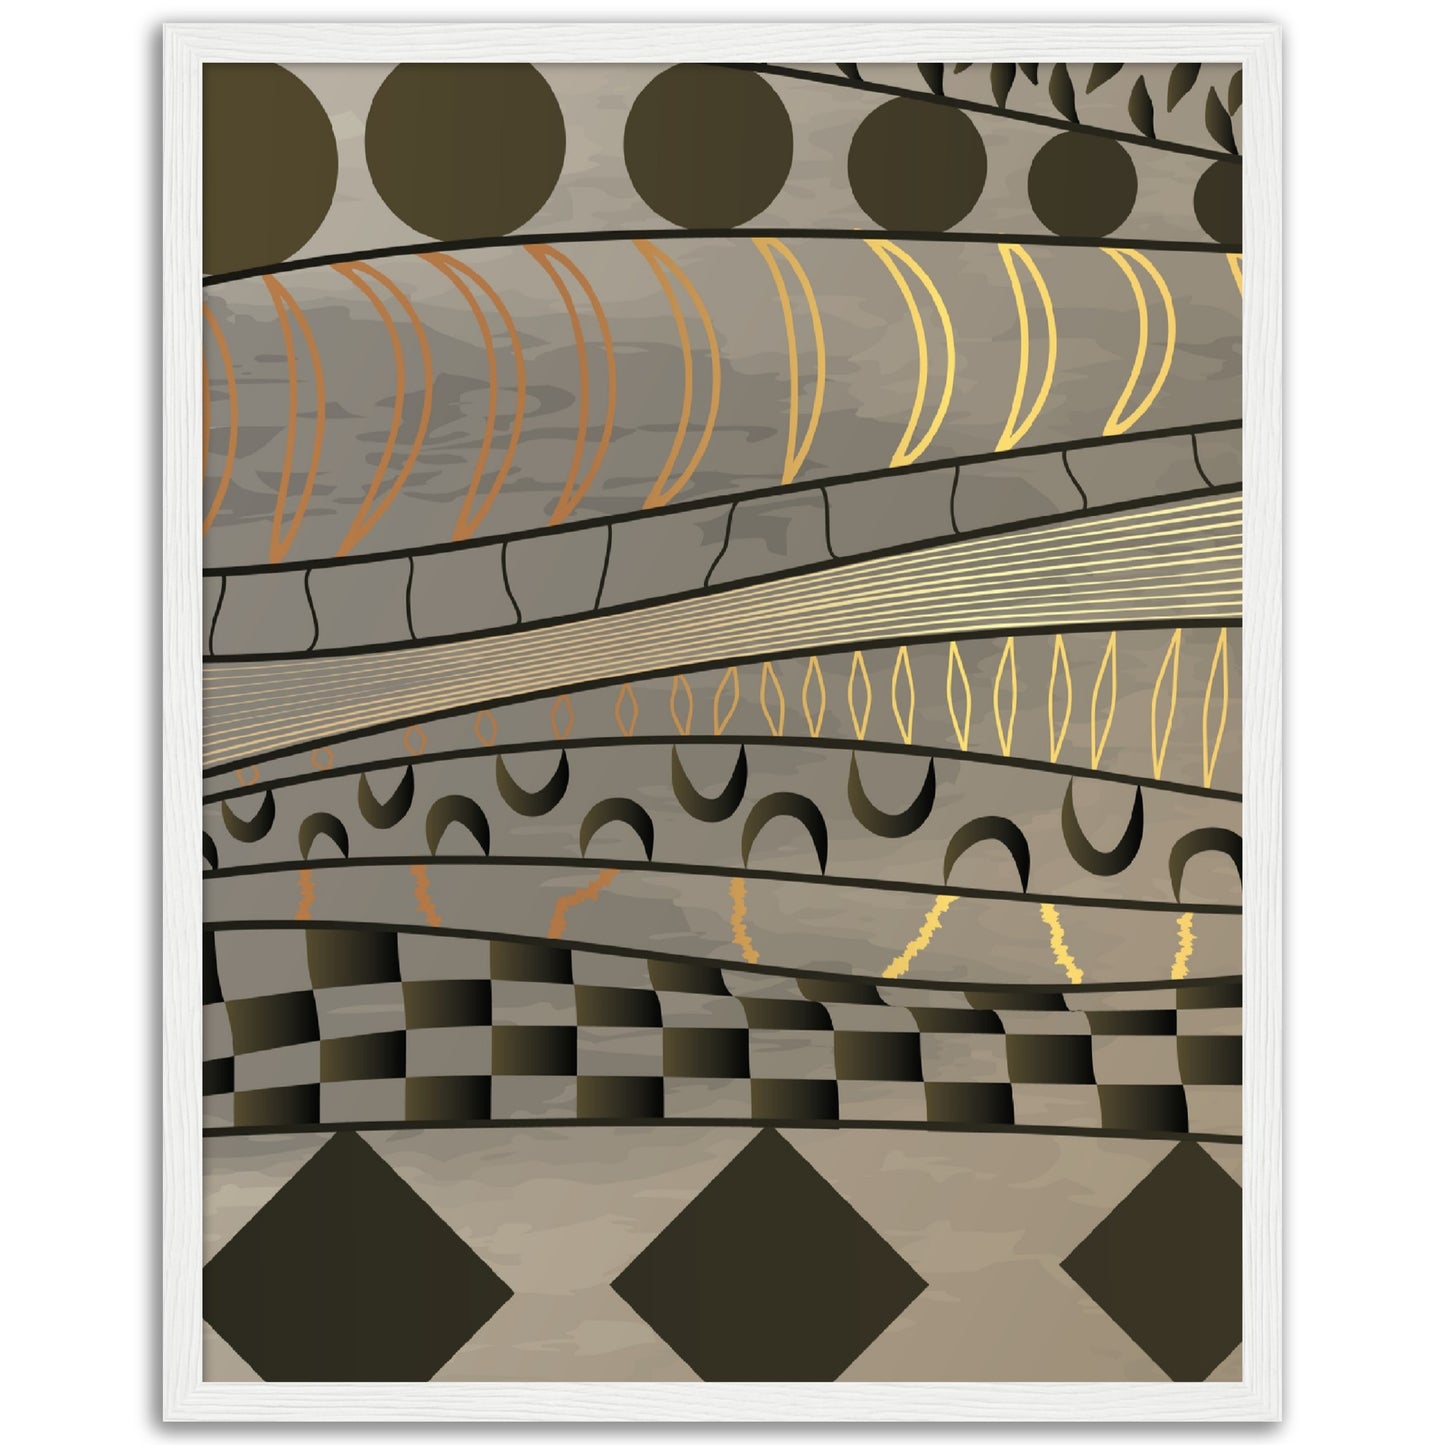 Abstract Tribal Landscape Print, No1